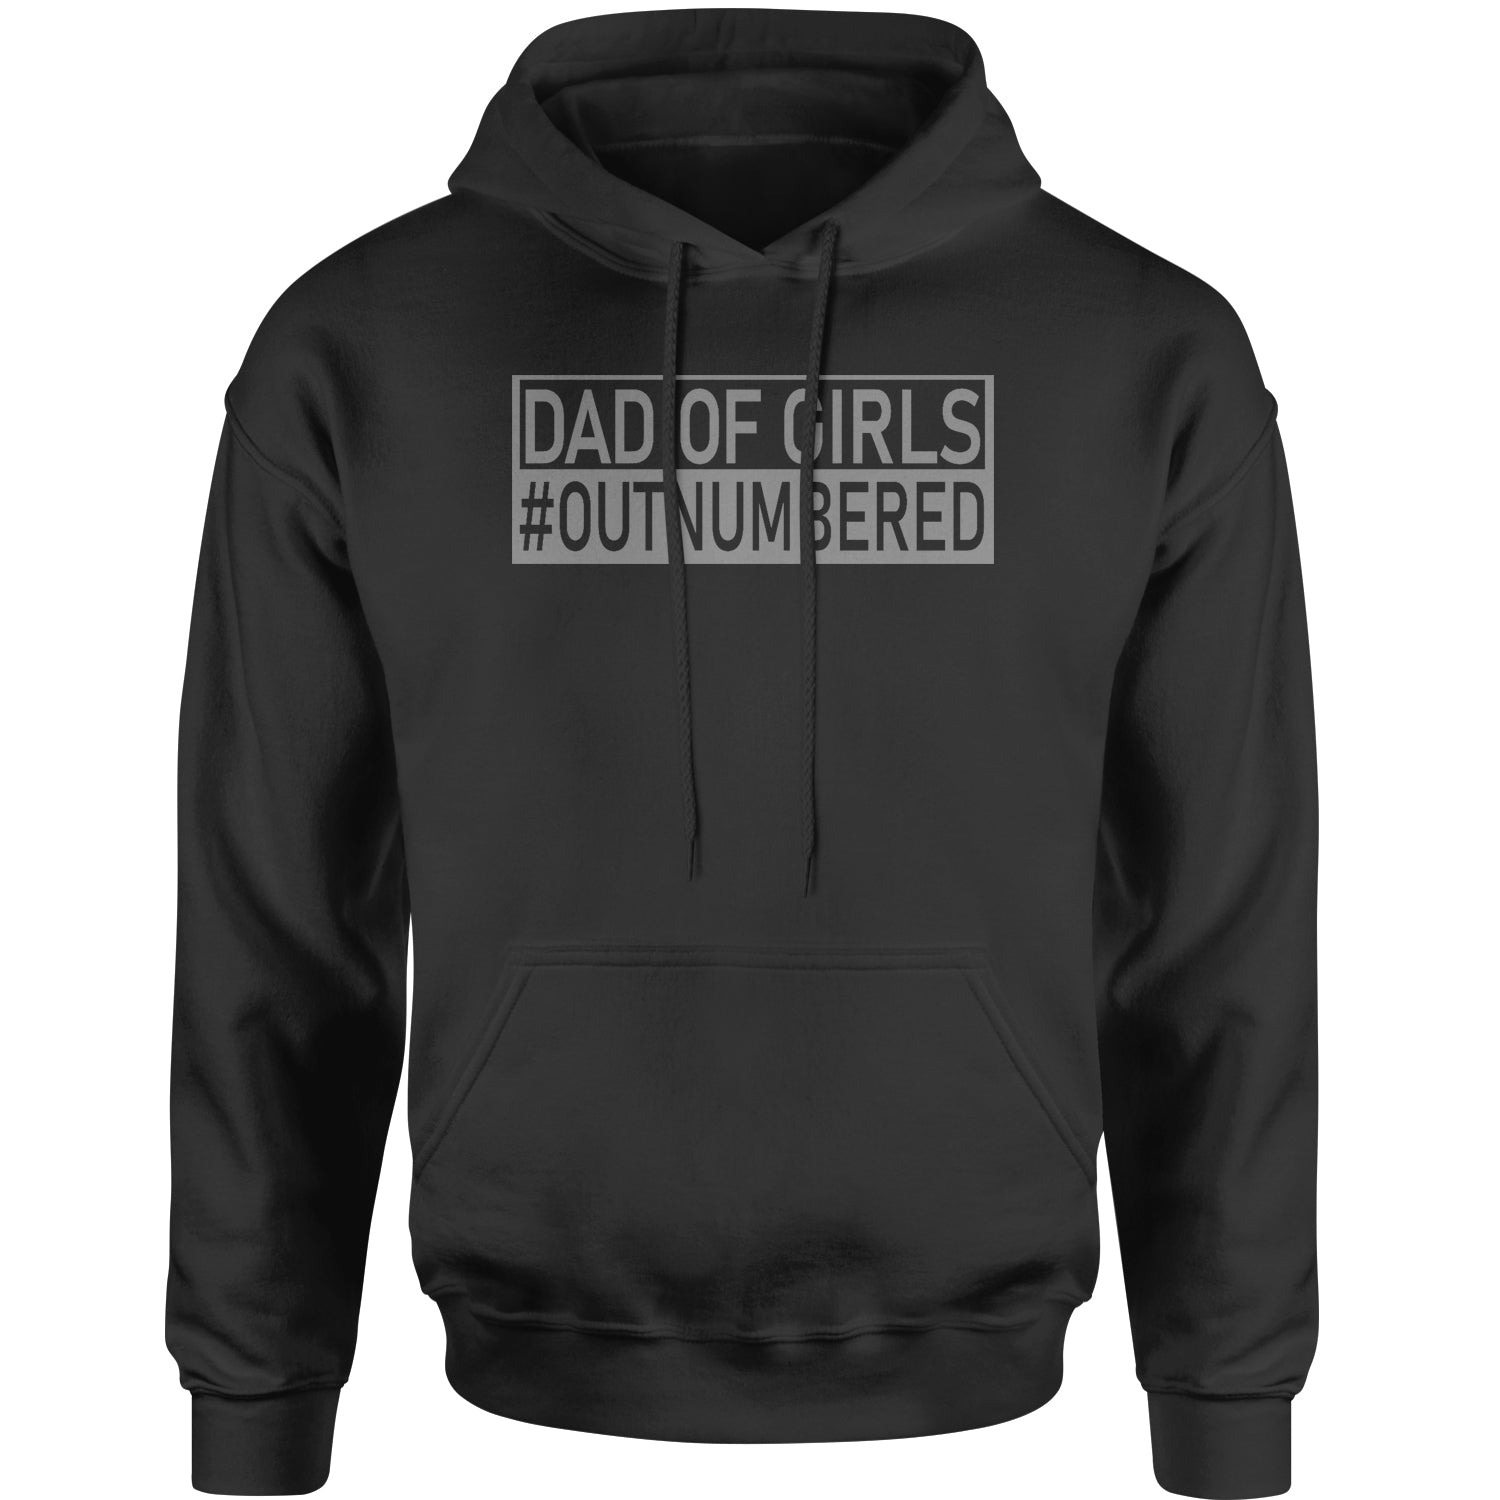 Dad of Girls Shirt for Fathers Day Gift Adult Hoodie Sweatshirt dad, day, fathers, papa, pop by Expression Tees